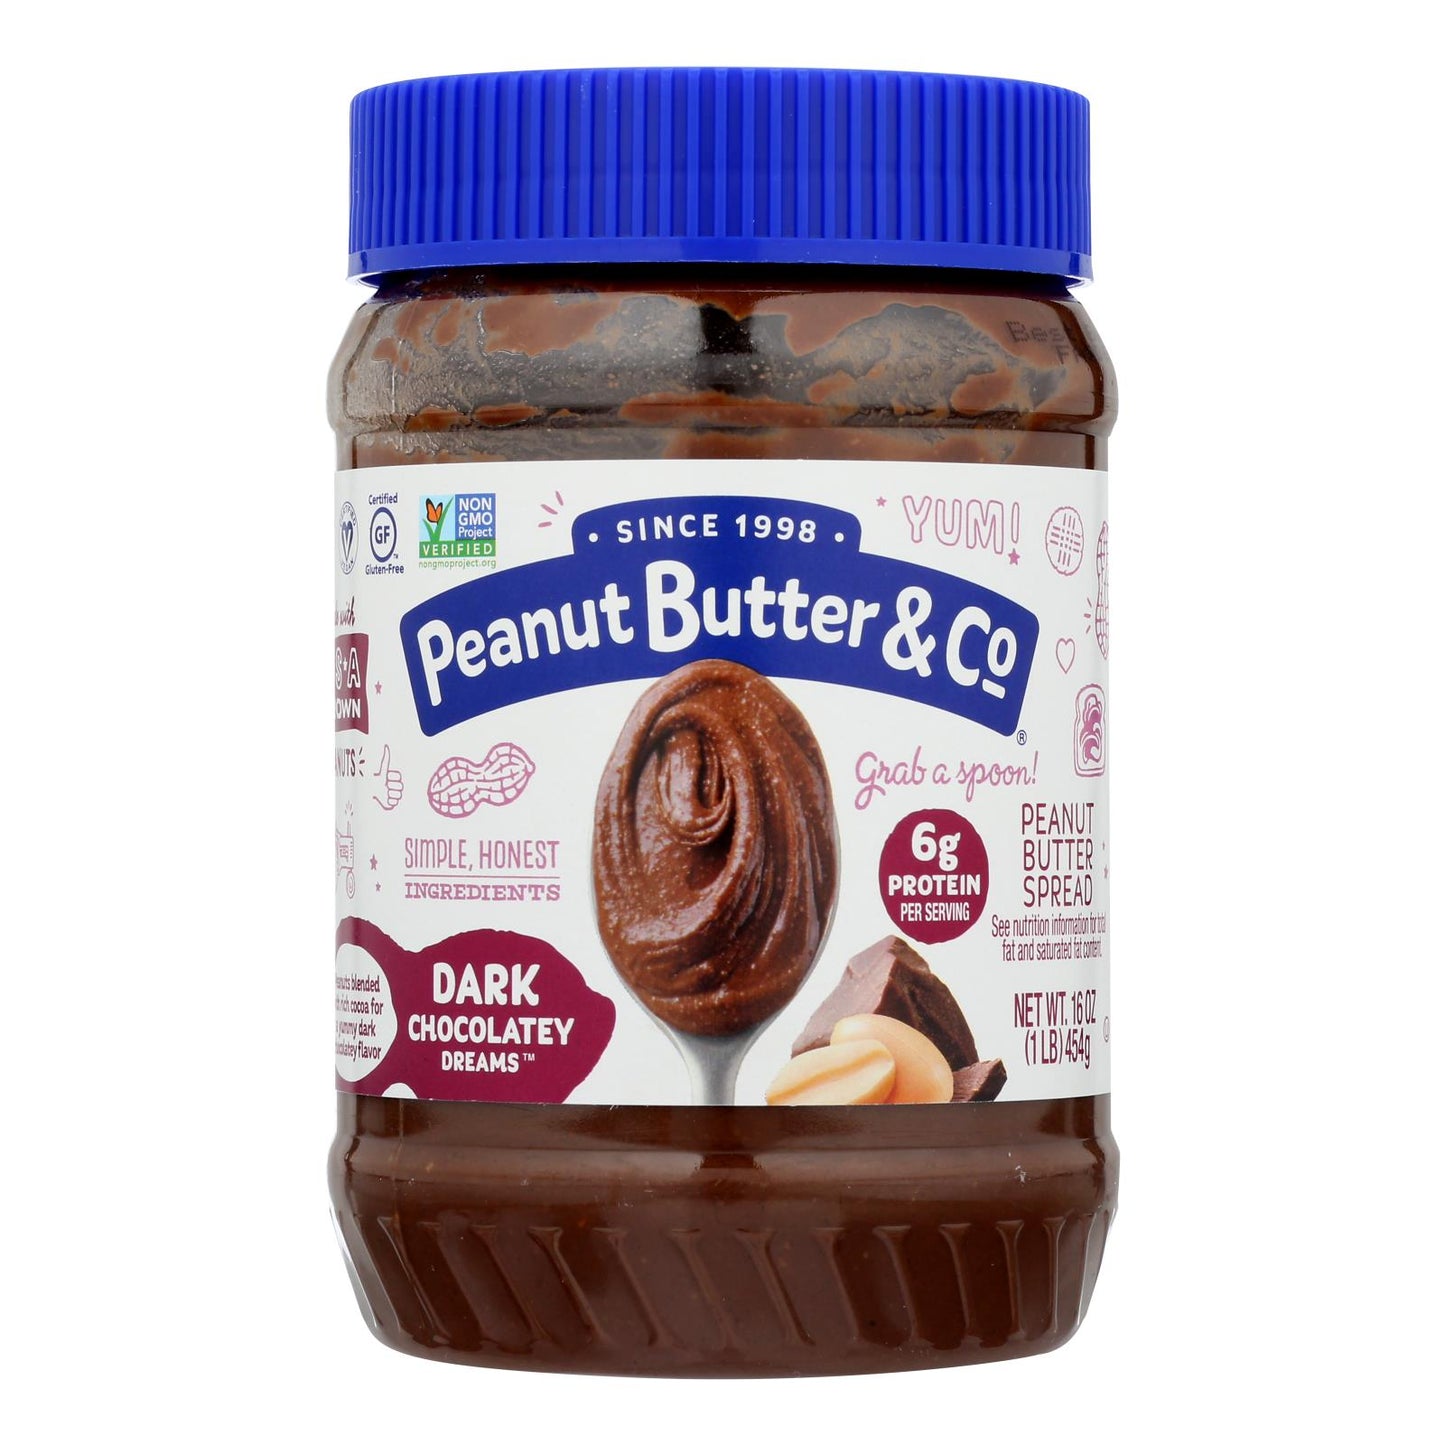 Peanut Butter And Co Peanut Butter - Dark Chocolate Dreams - Case Of 6 - 16 Oz.